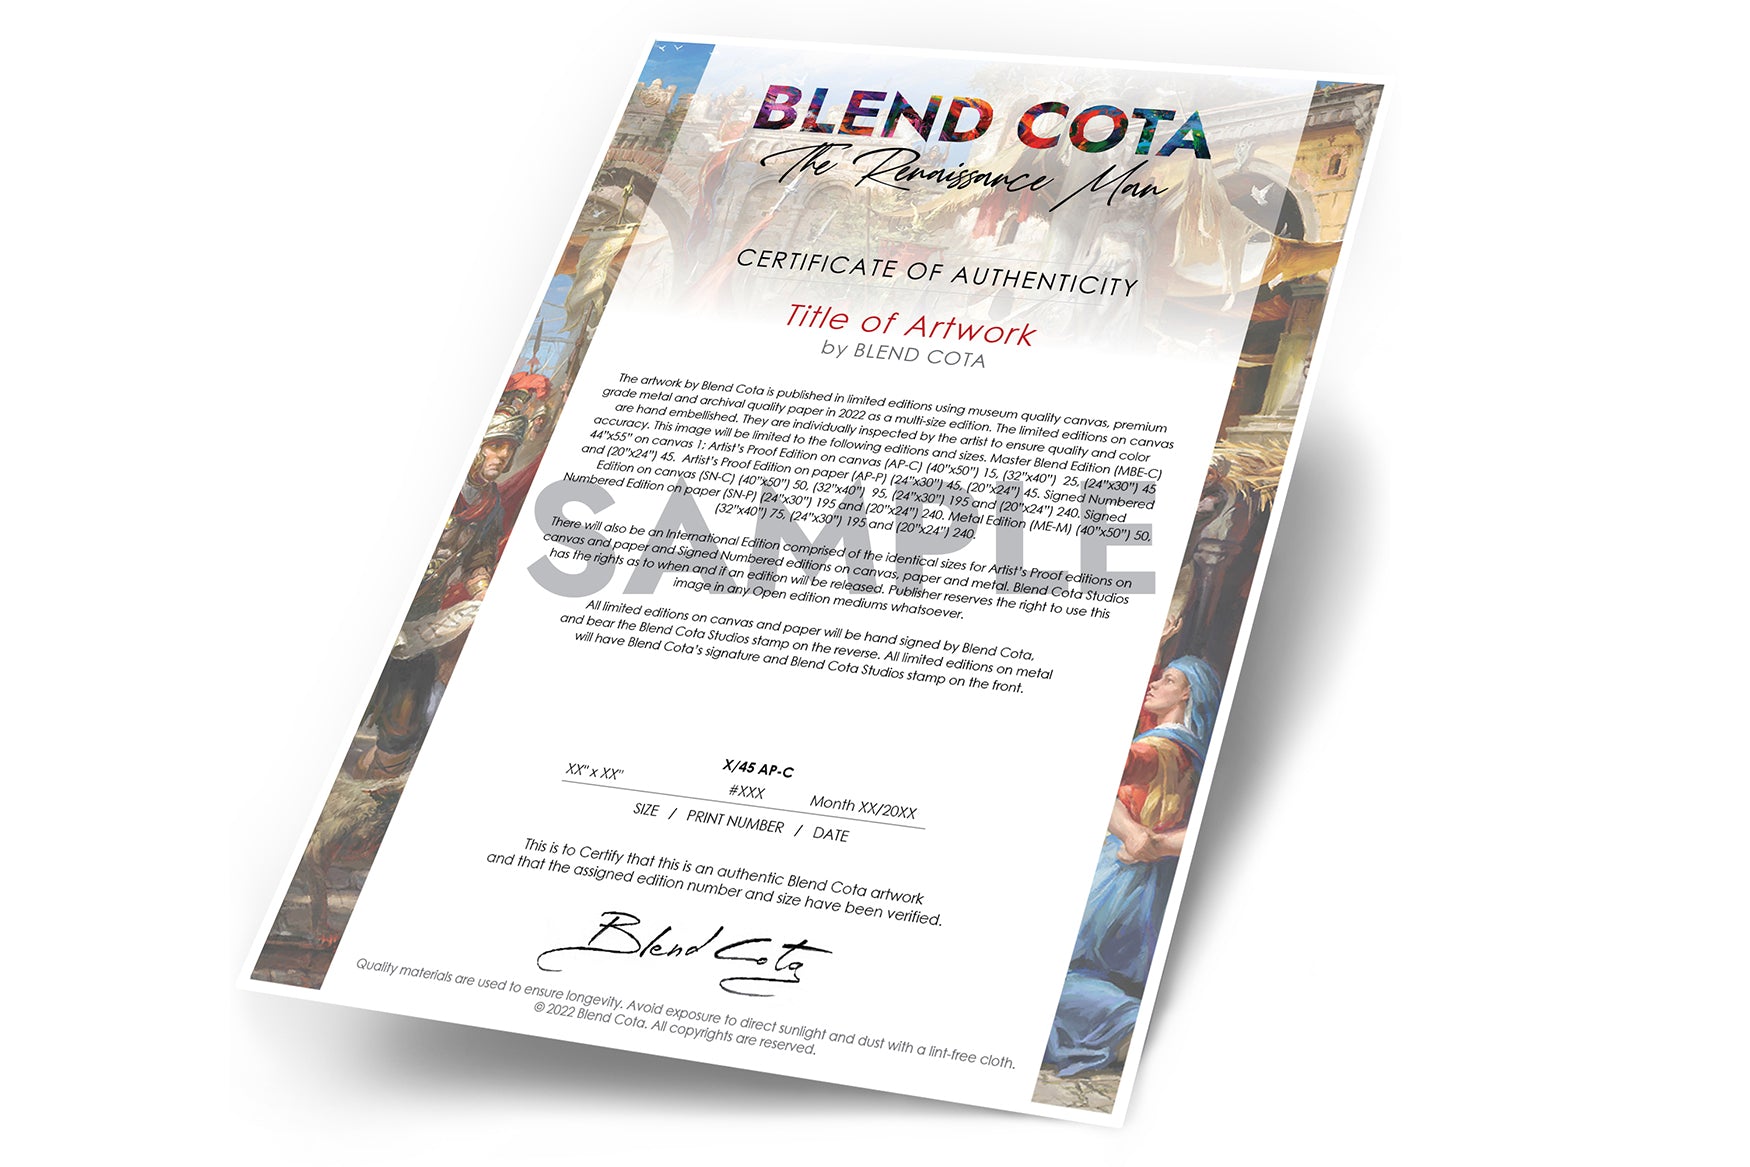 
                  
                    The Treehouse - Blend Cota Limited Edition Art on Metal - Blend Cota Studios - certificate of authenticity
                  
                